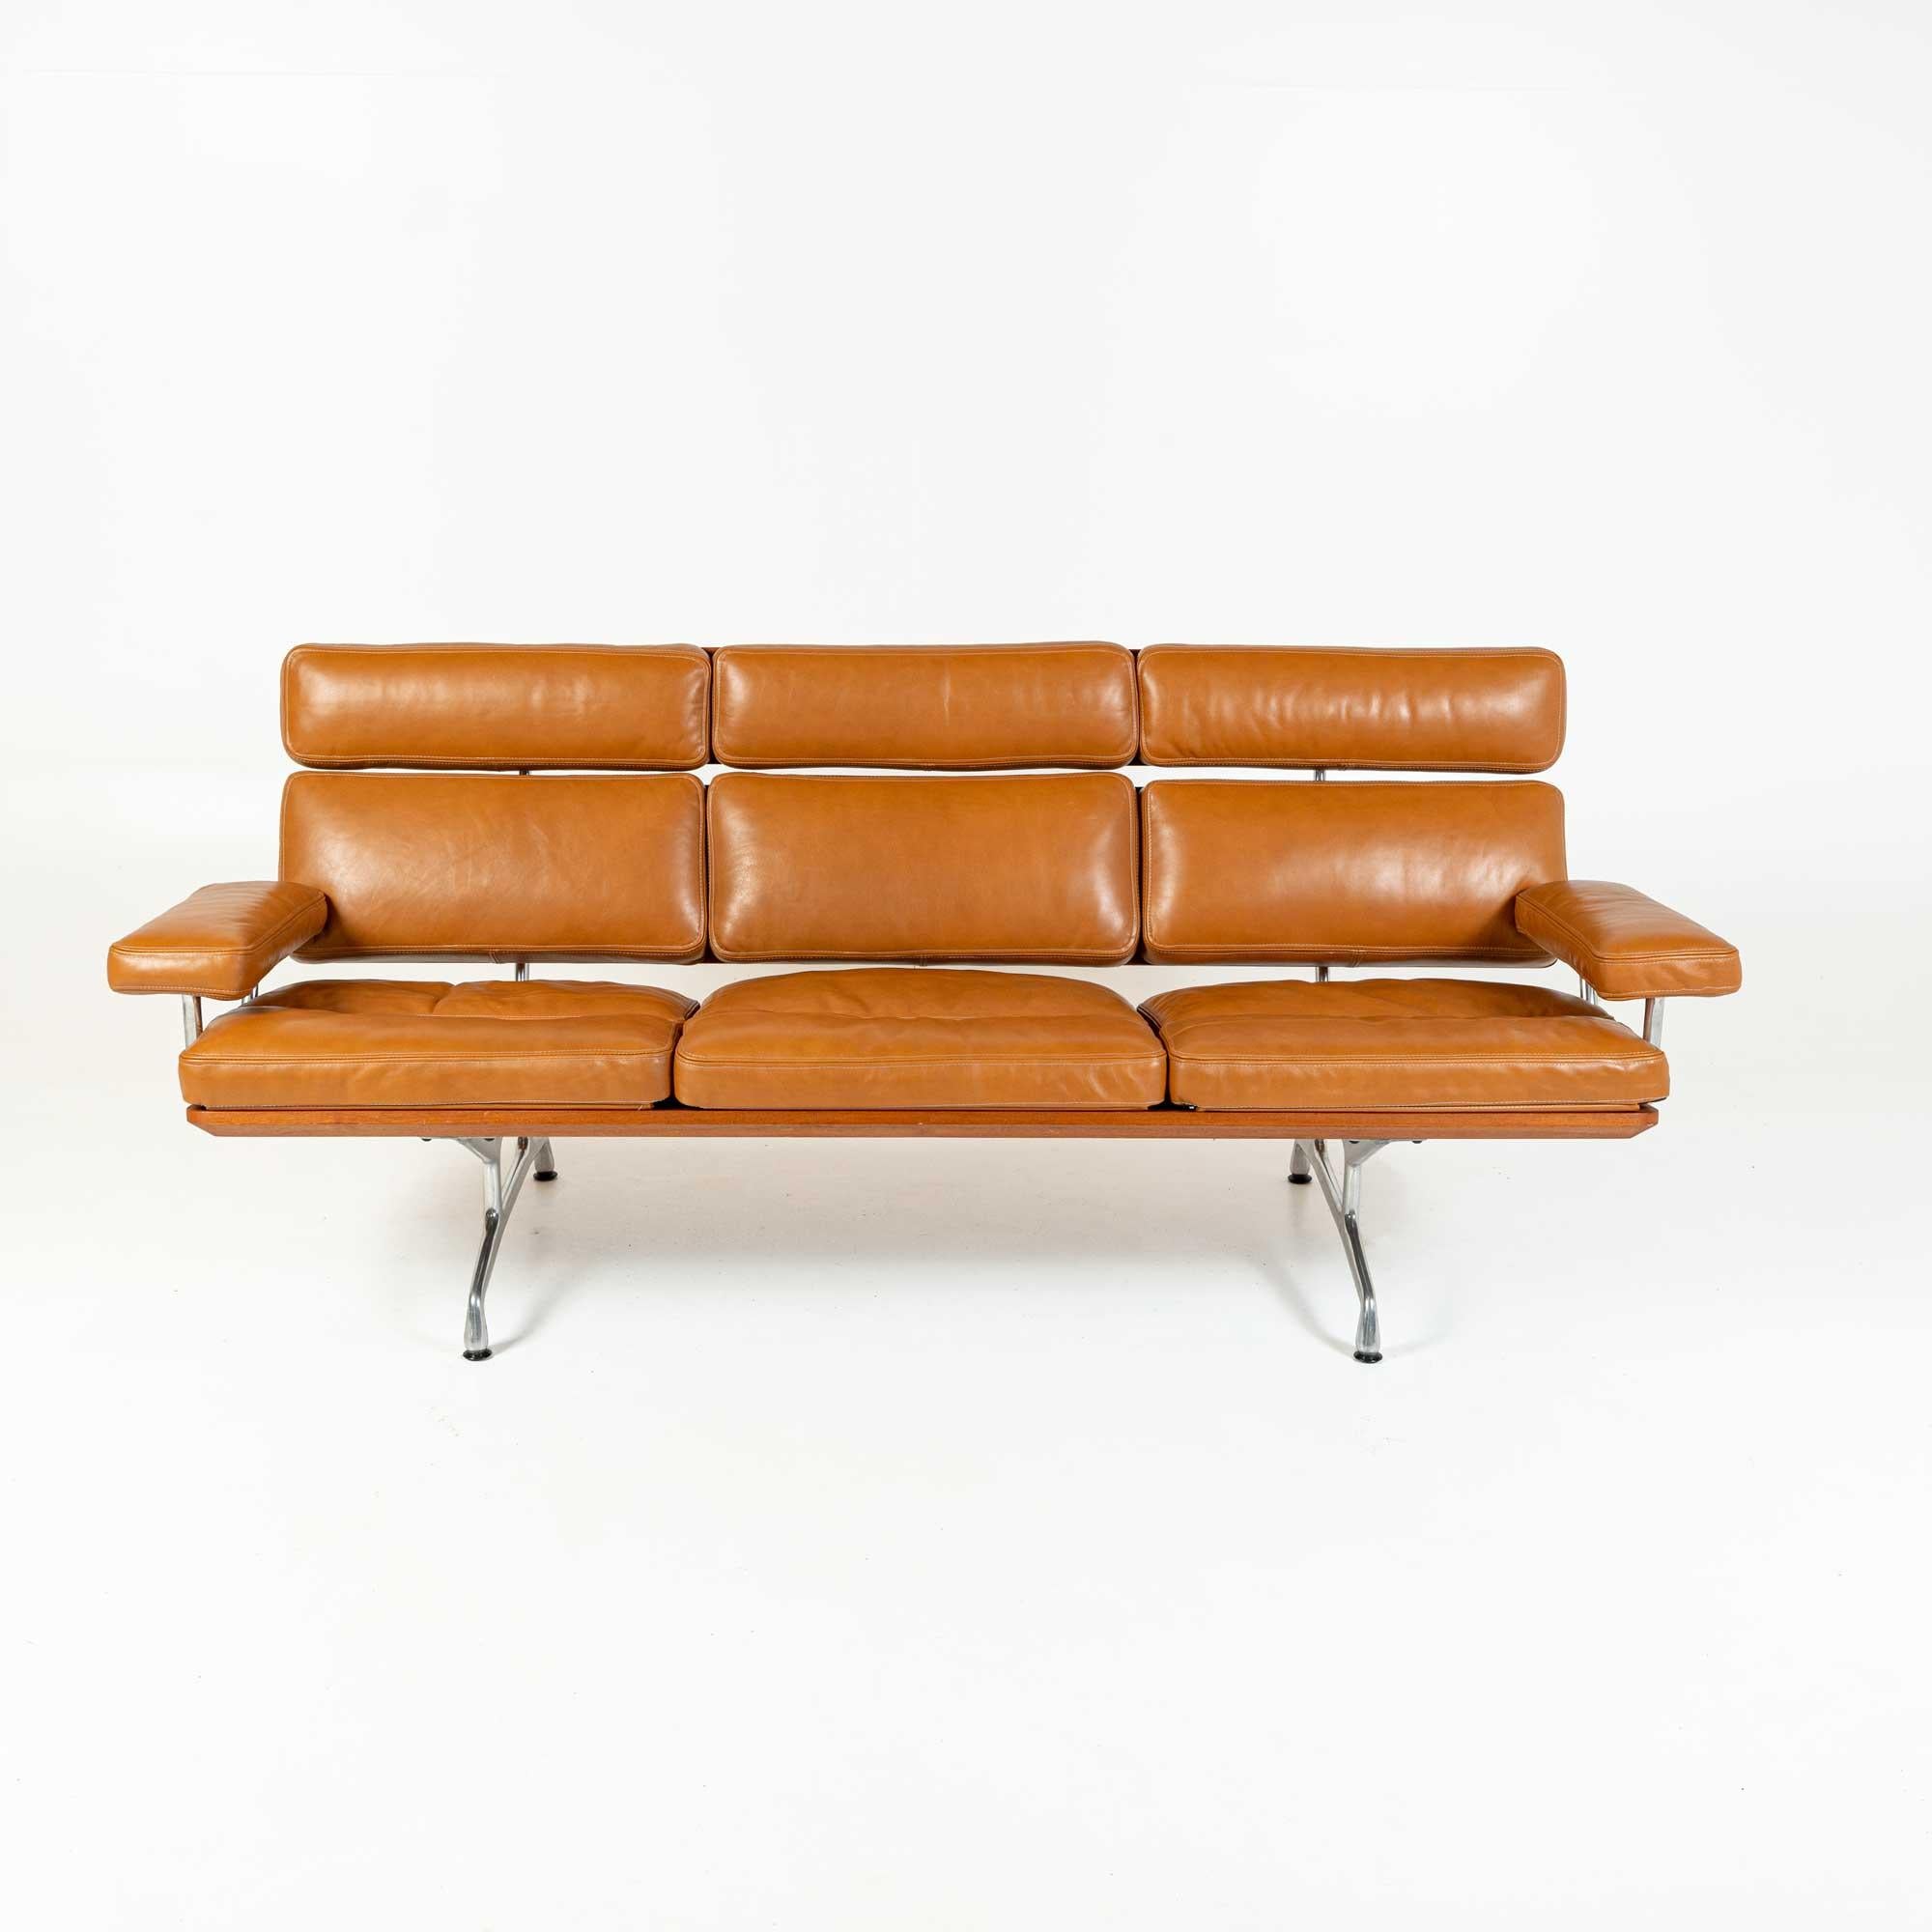 This is the iconic Eames Sofa in teak and reupholstered in top of the line Maharam Sorghum Aniline leather. Very minimal wear on the frame. Some natural marking on the leather. Overall in great restored condition ready for use.

The Eames was the